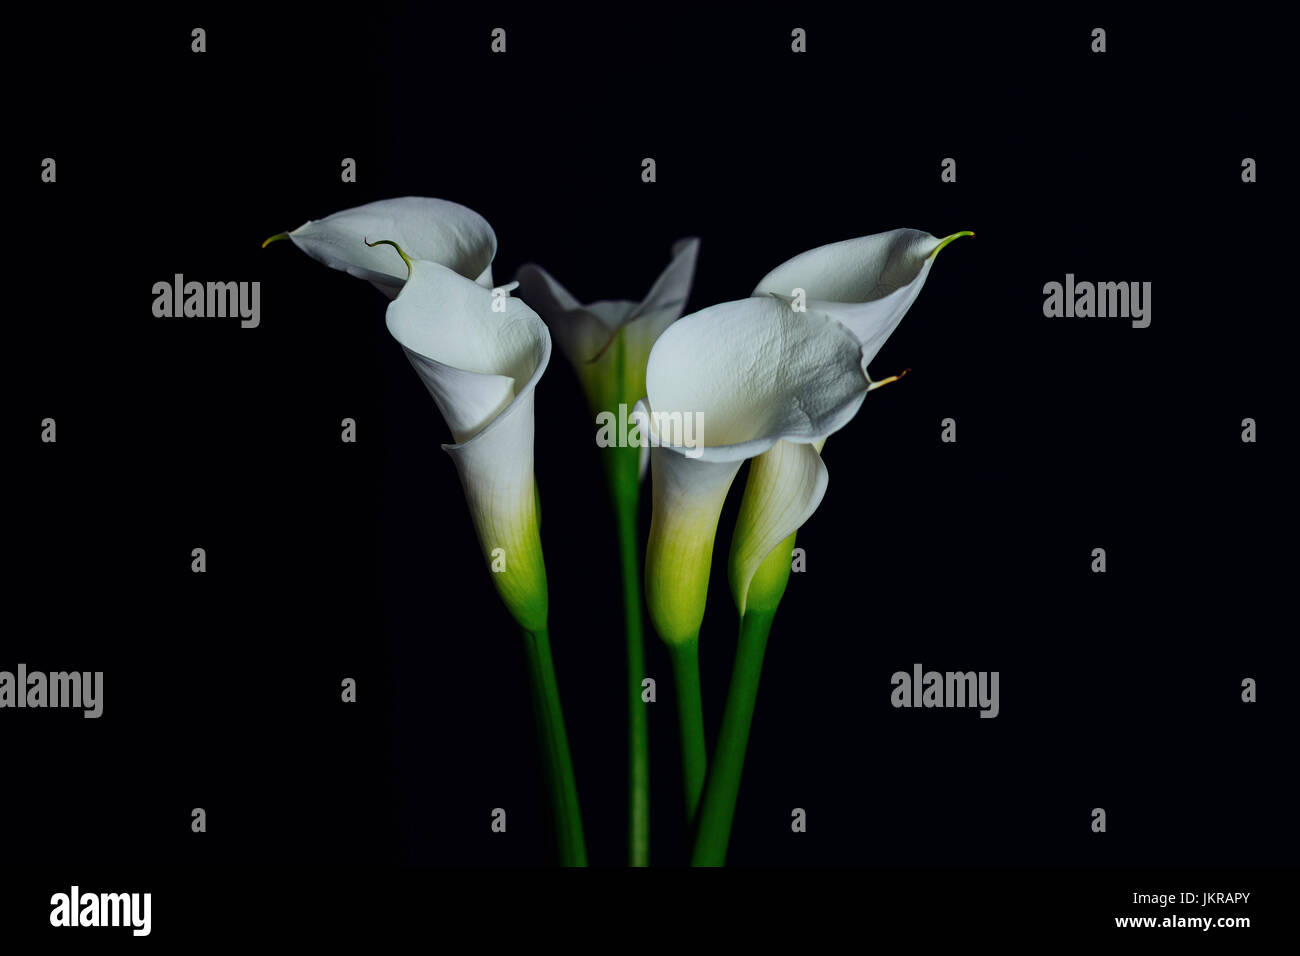 Close-up of white Calla Lily flowers against black background Stock Photo